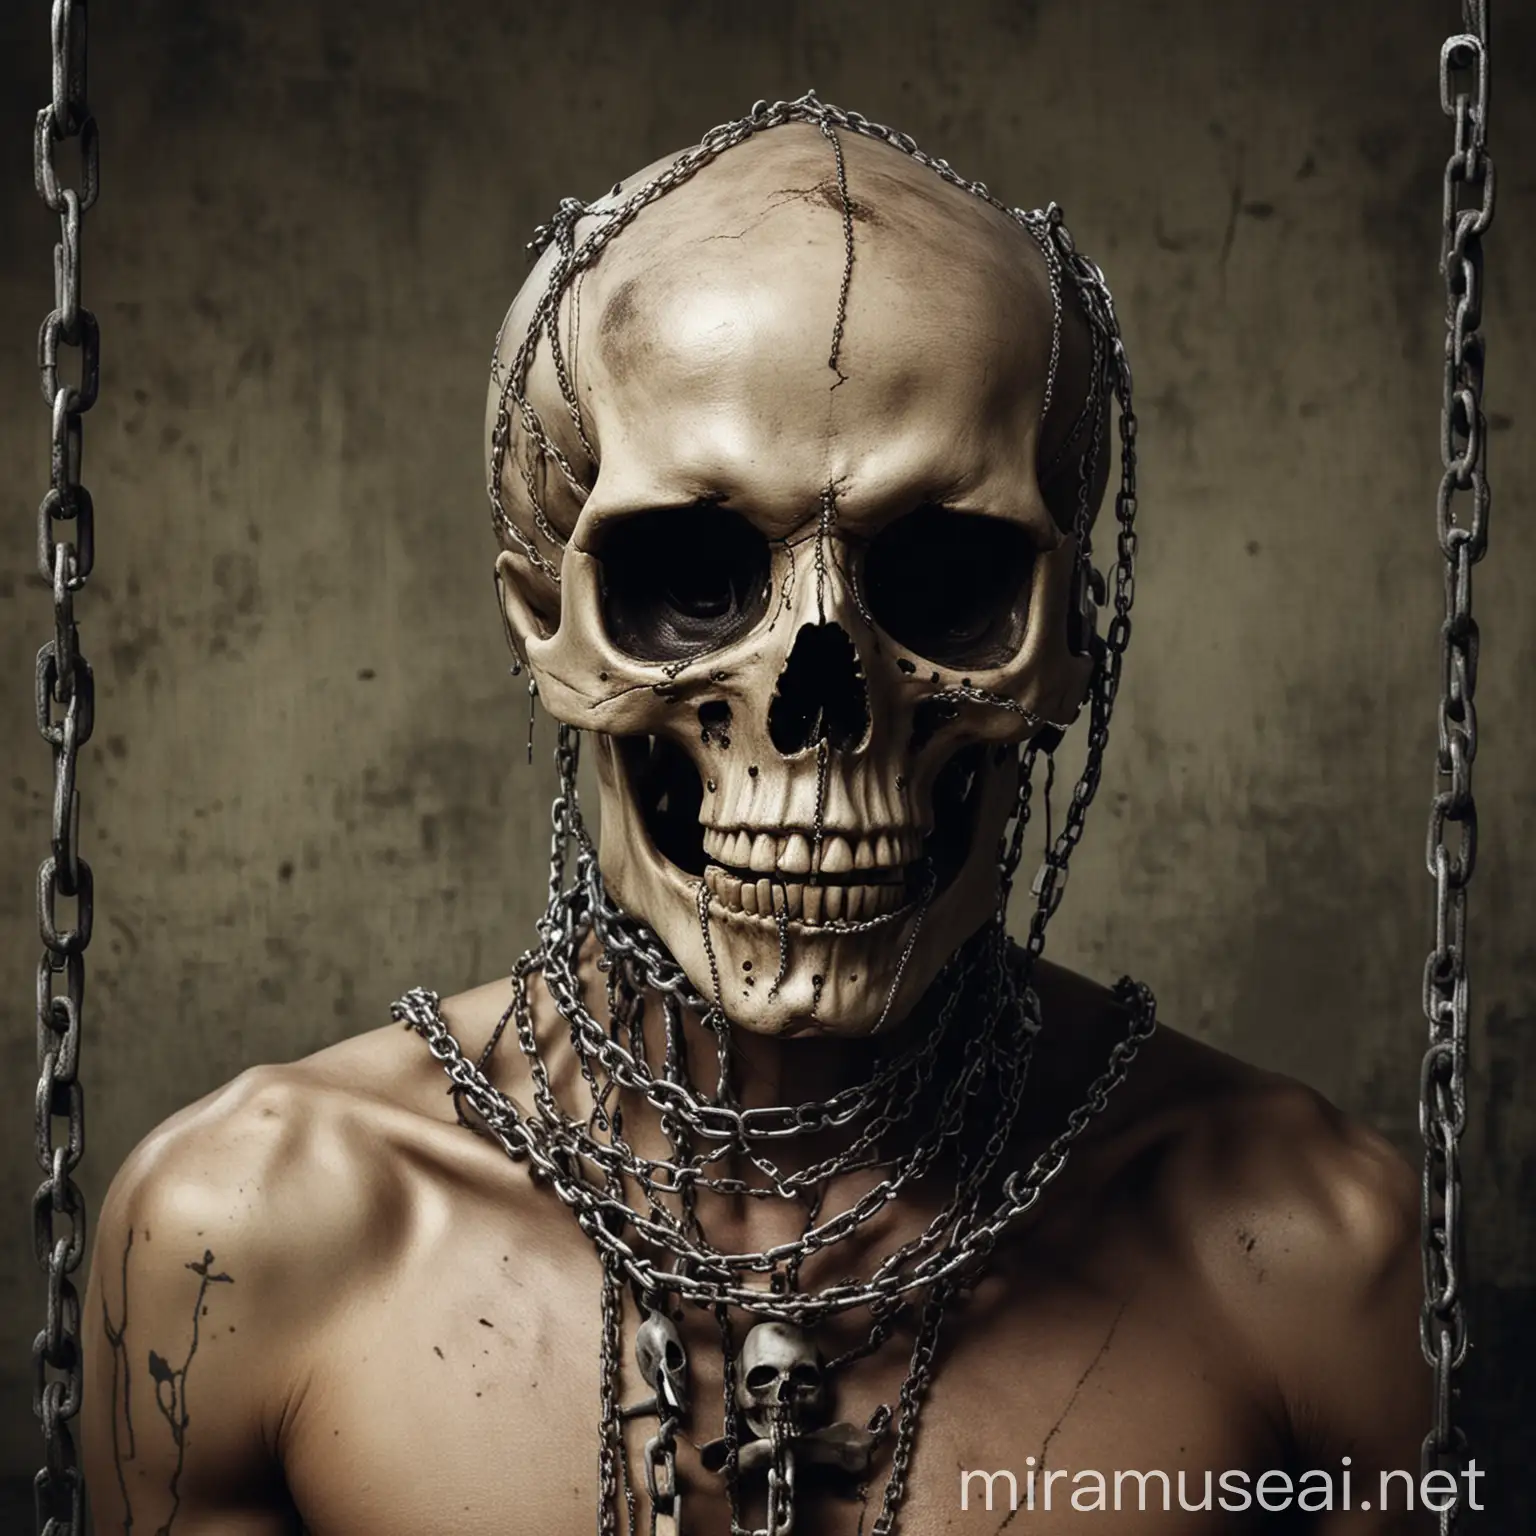 Skullhead Tied Up in Chains Artwork